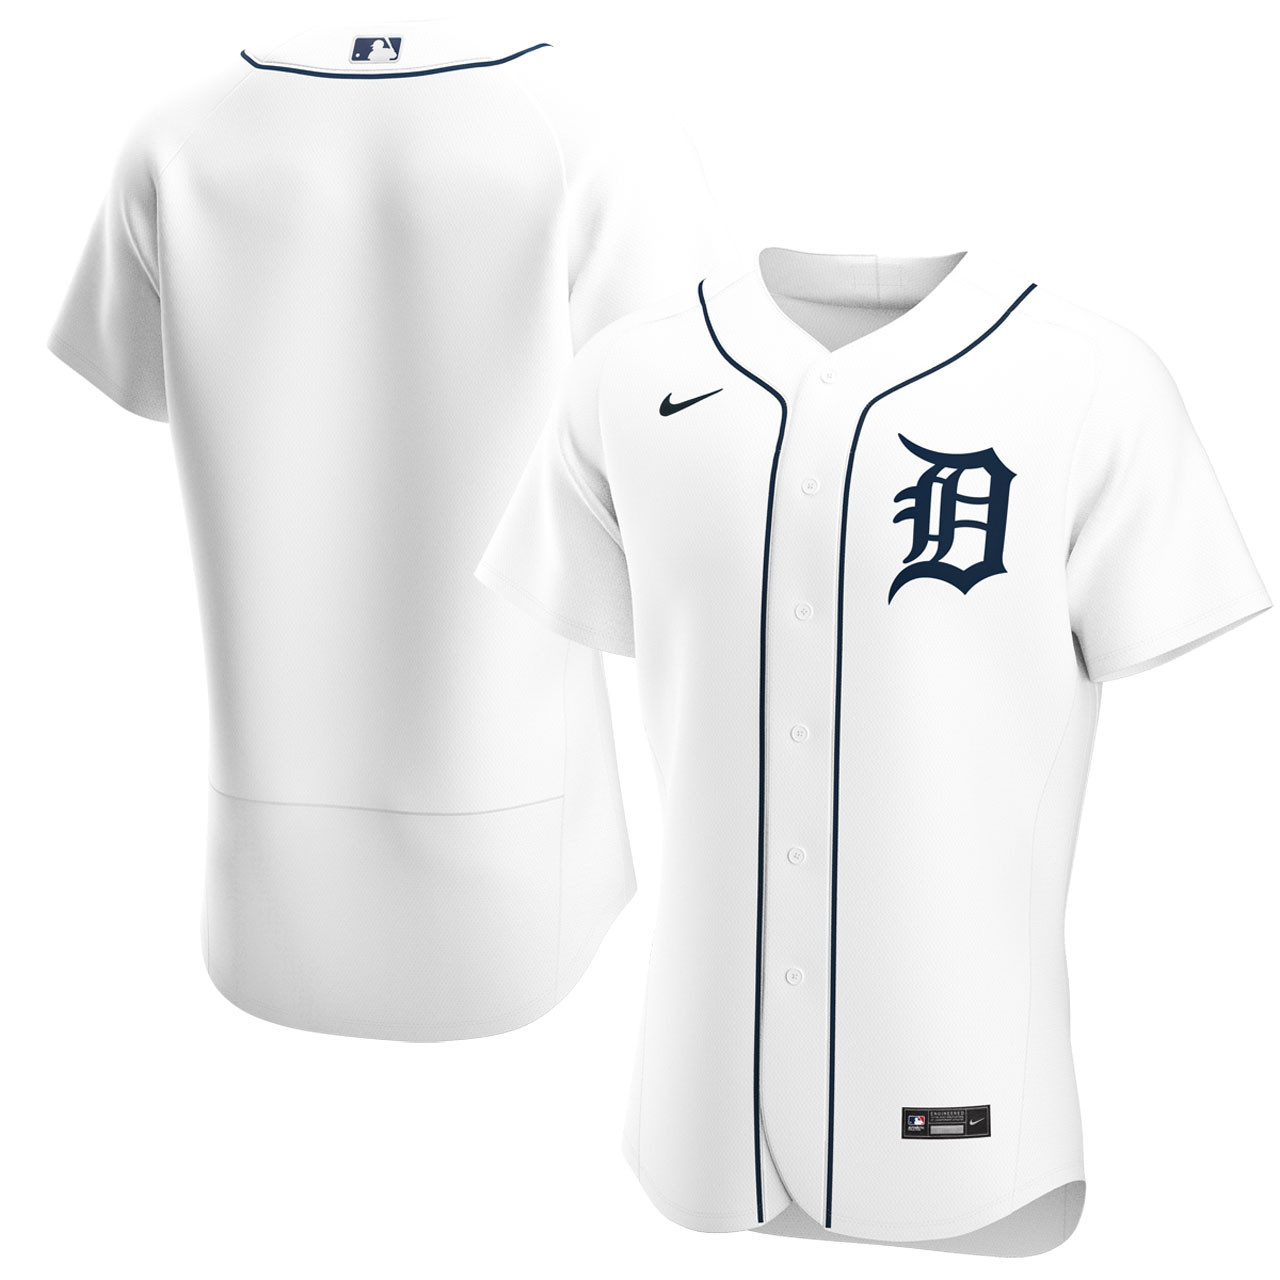 Detroit Tigers White Home Authentic Jersey by Nike